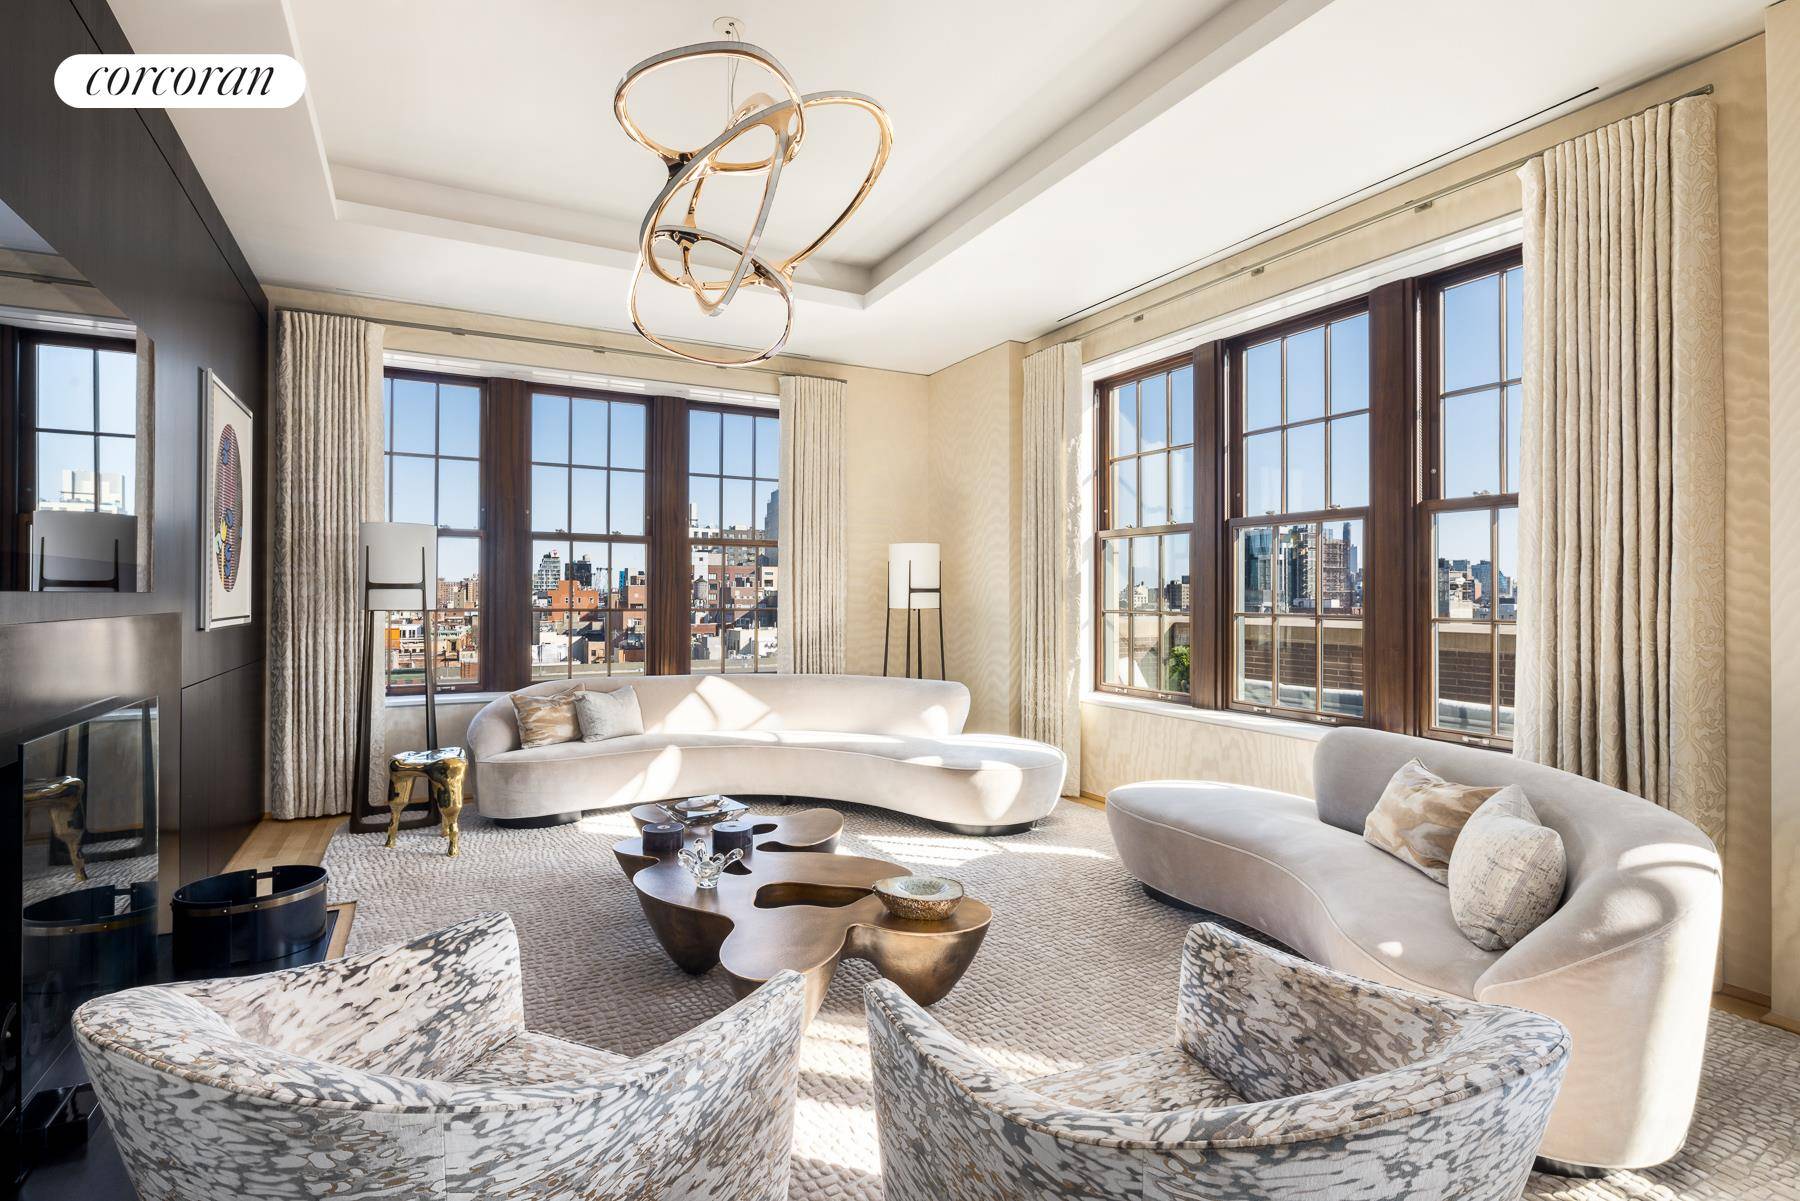 The Penthouse at 224 Mulberry is a custom, one of a kind duplex residence crowning one of downtown Manhattan's premier full service boutique pre war condominiums.